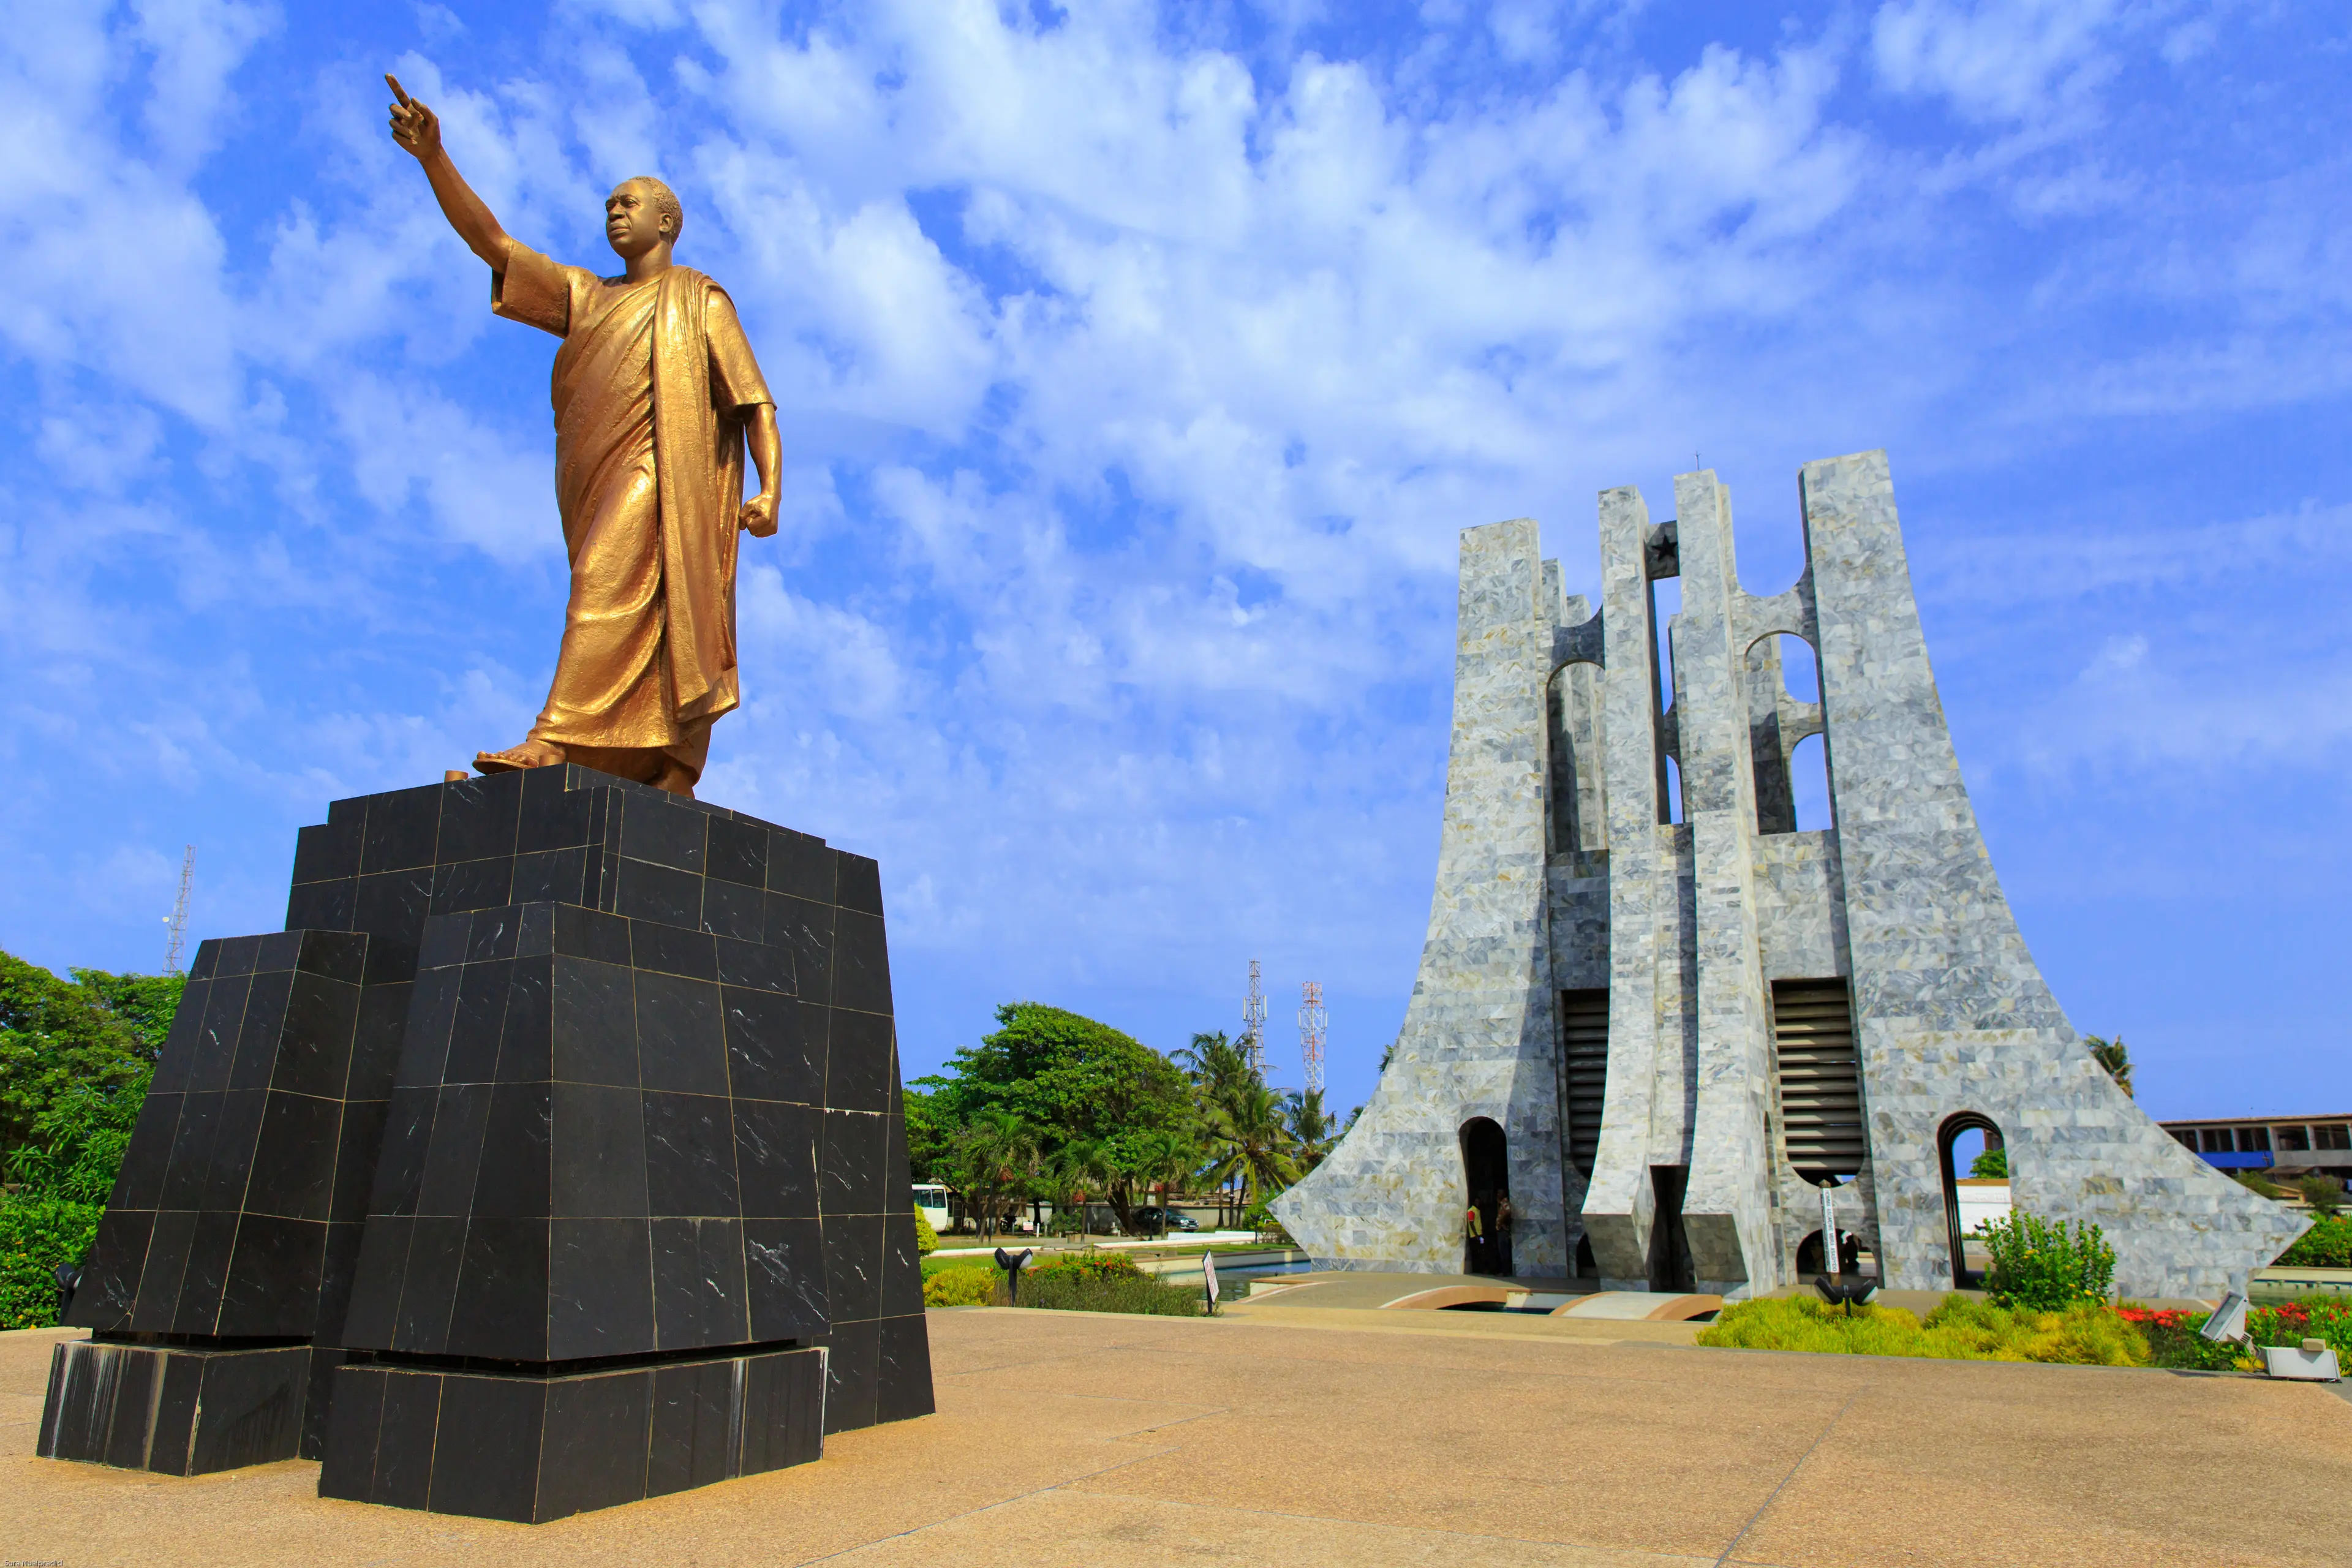 5-Day Family Shopping and Sightseeing Adventure in Accra, Ghana